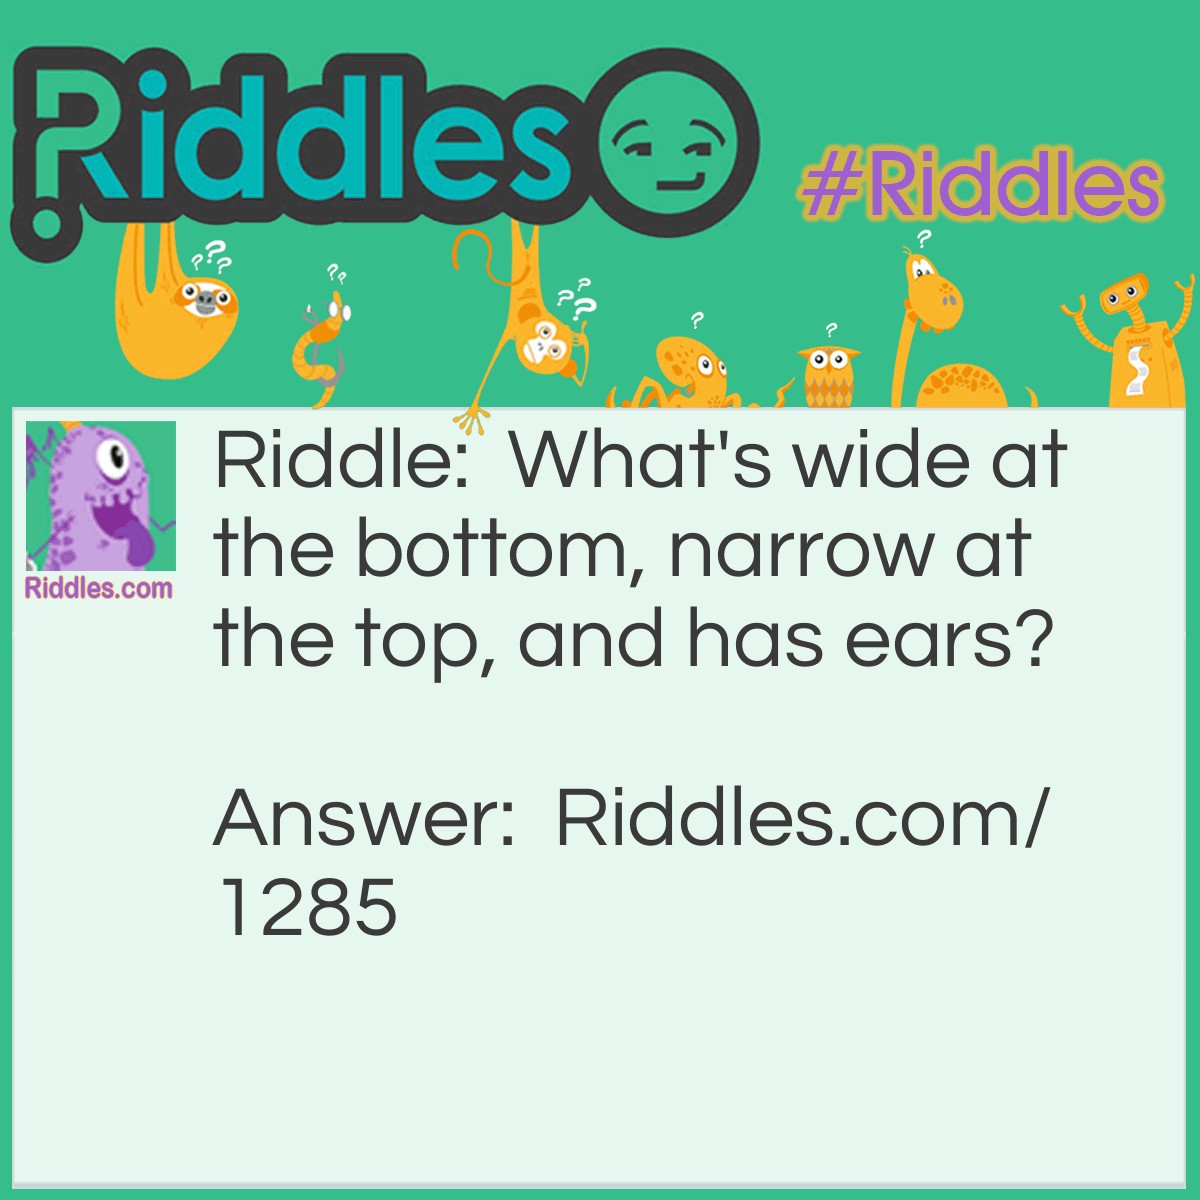 Riddle: What's wide at the bottom, narrow at the top, and has ears? Answer: A mountain with mountainears